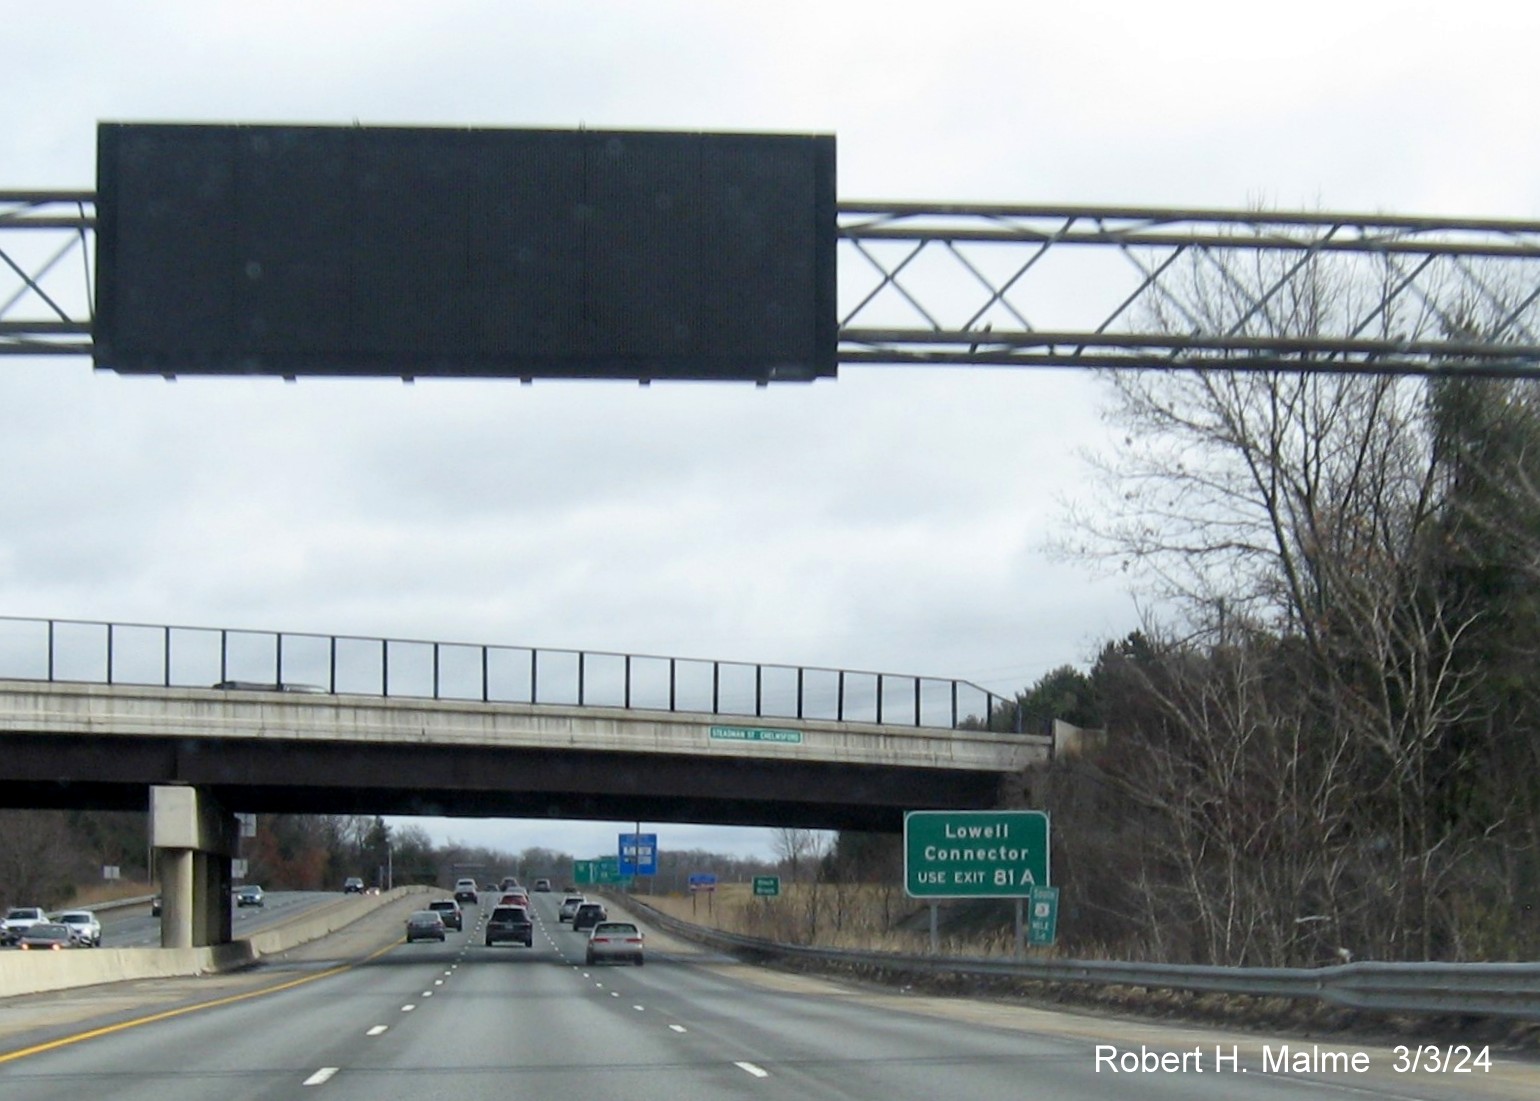 Image of recently placed auxiliary sign for Lowell Connector exit on US 3 South in Chelmsford, March 2024